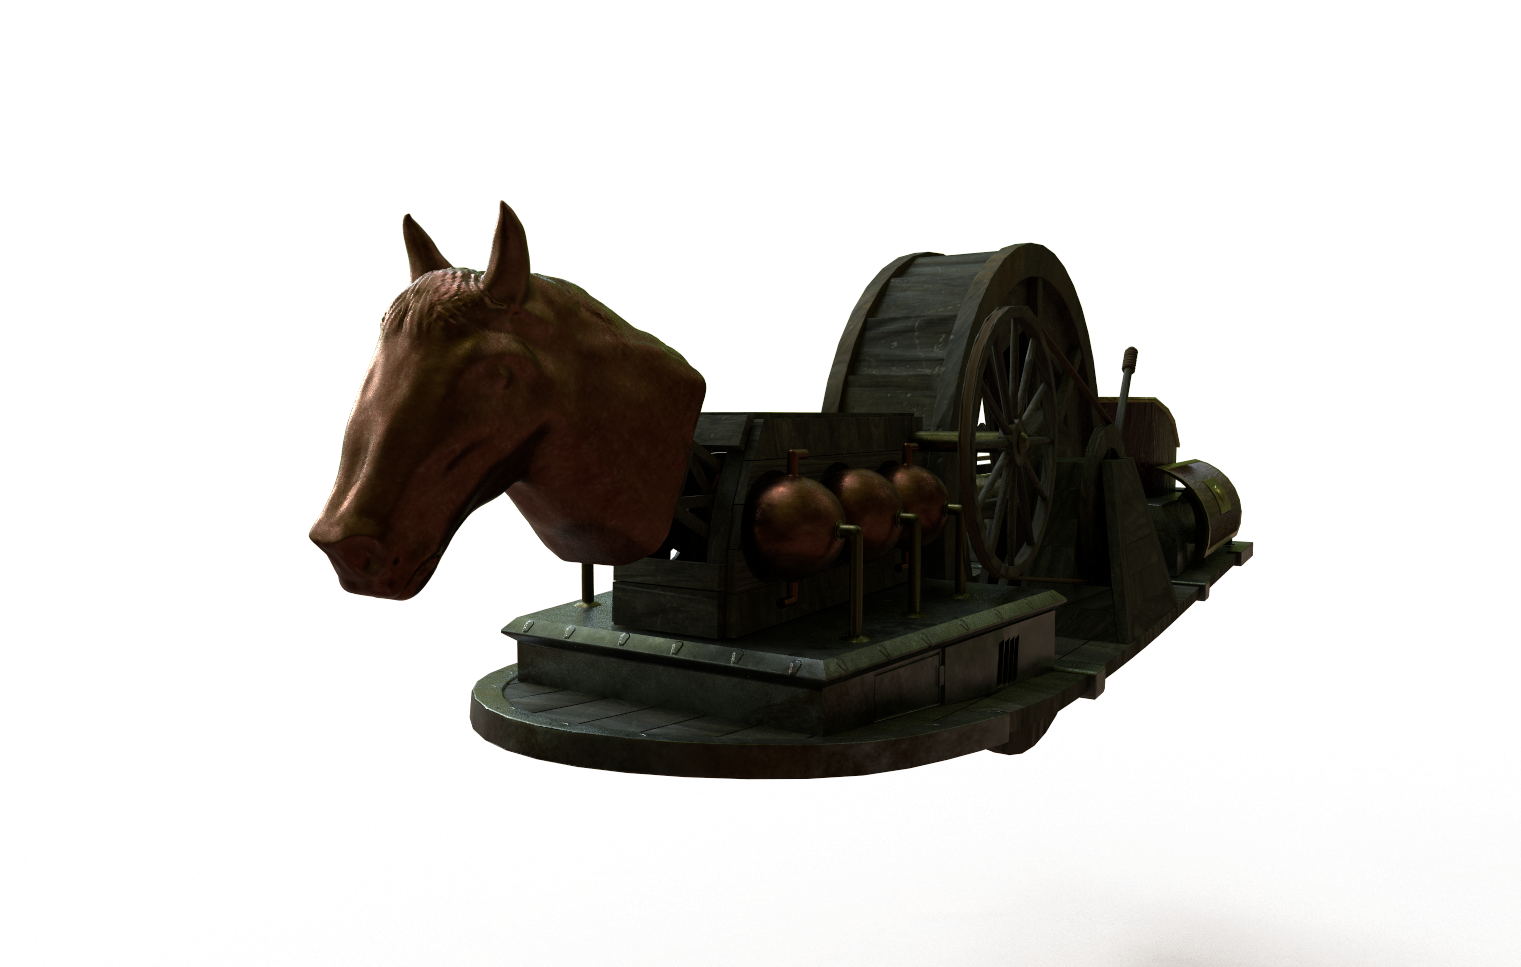 A render of a steam-powered ancient Roman Chariot